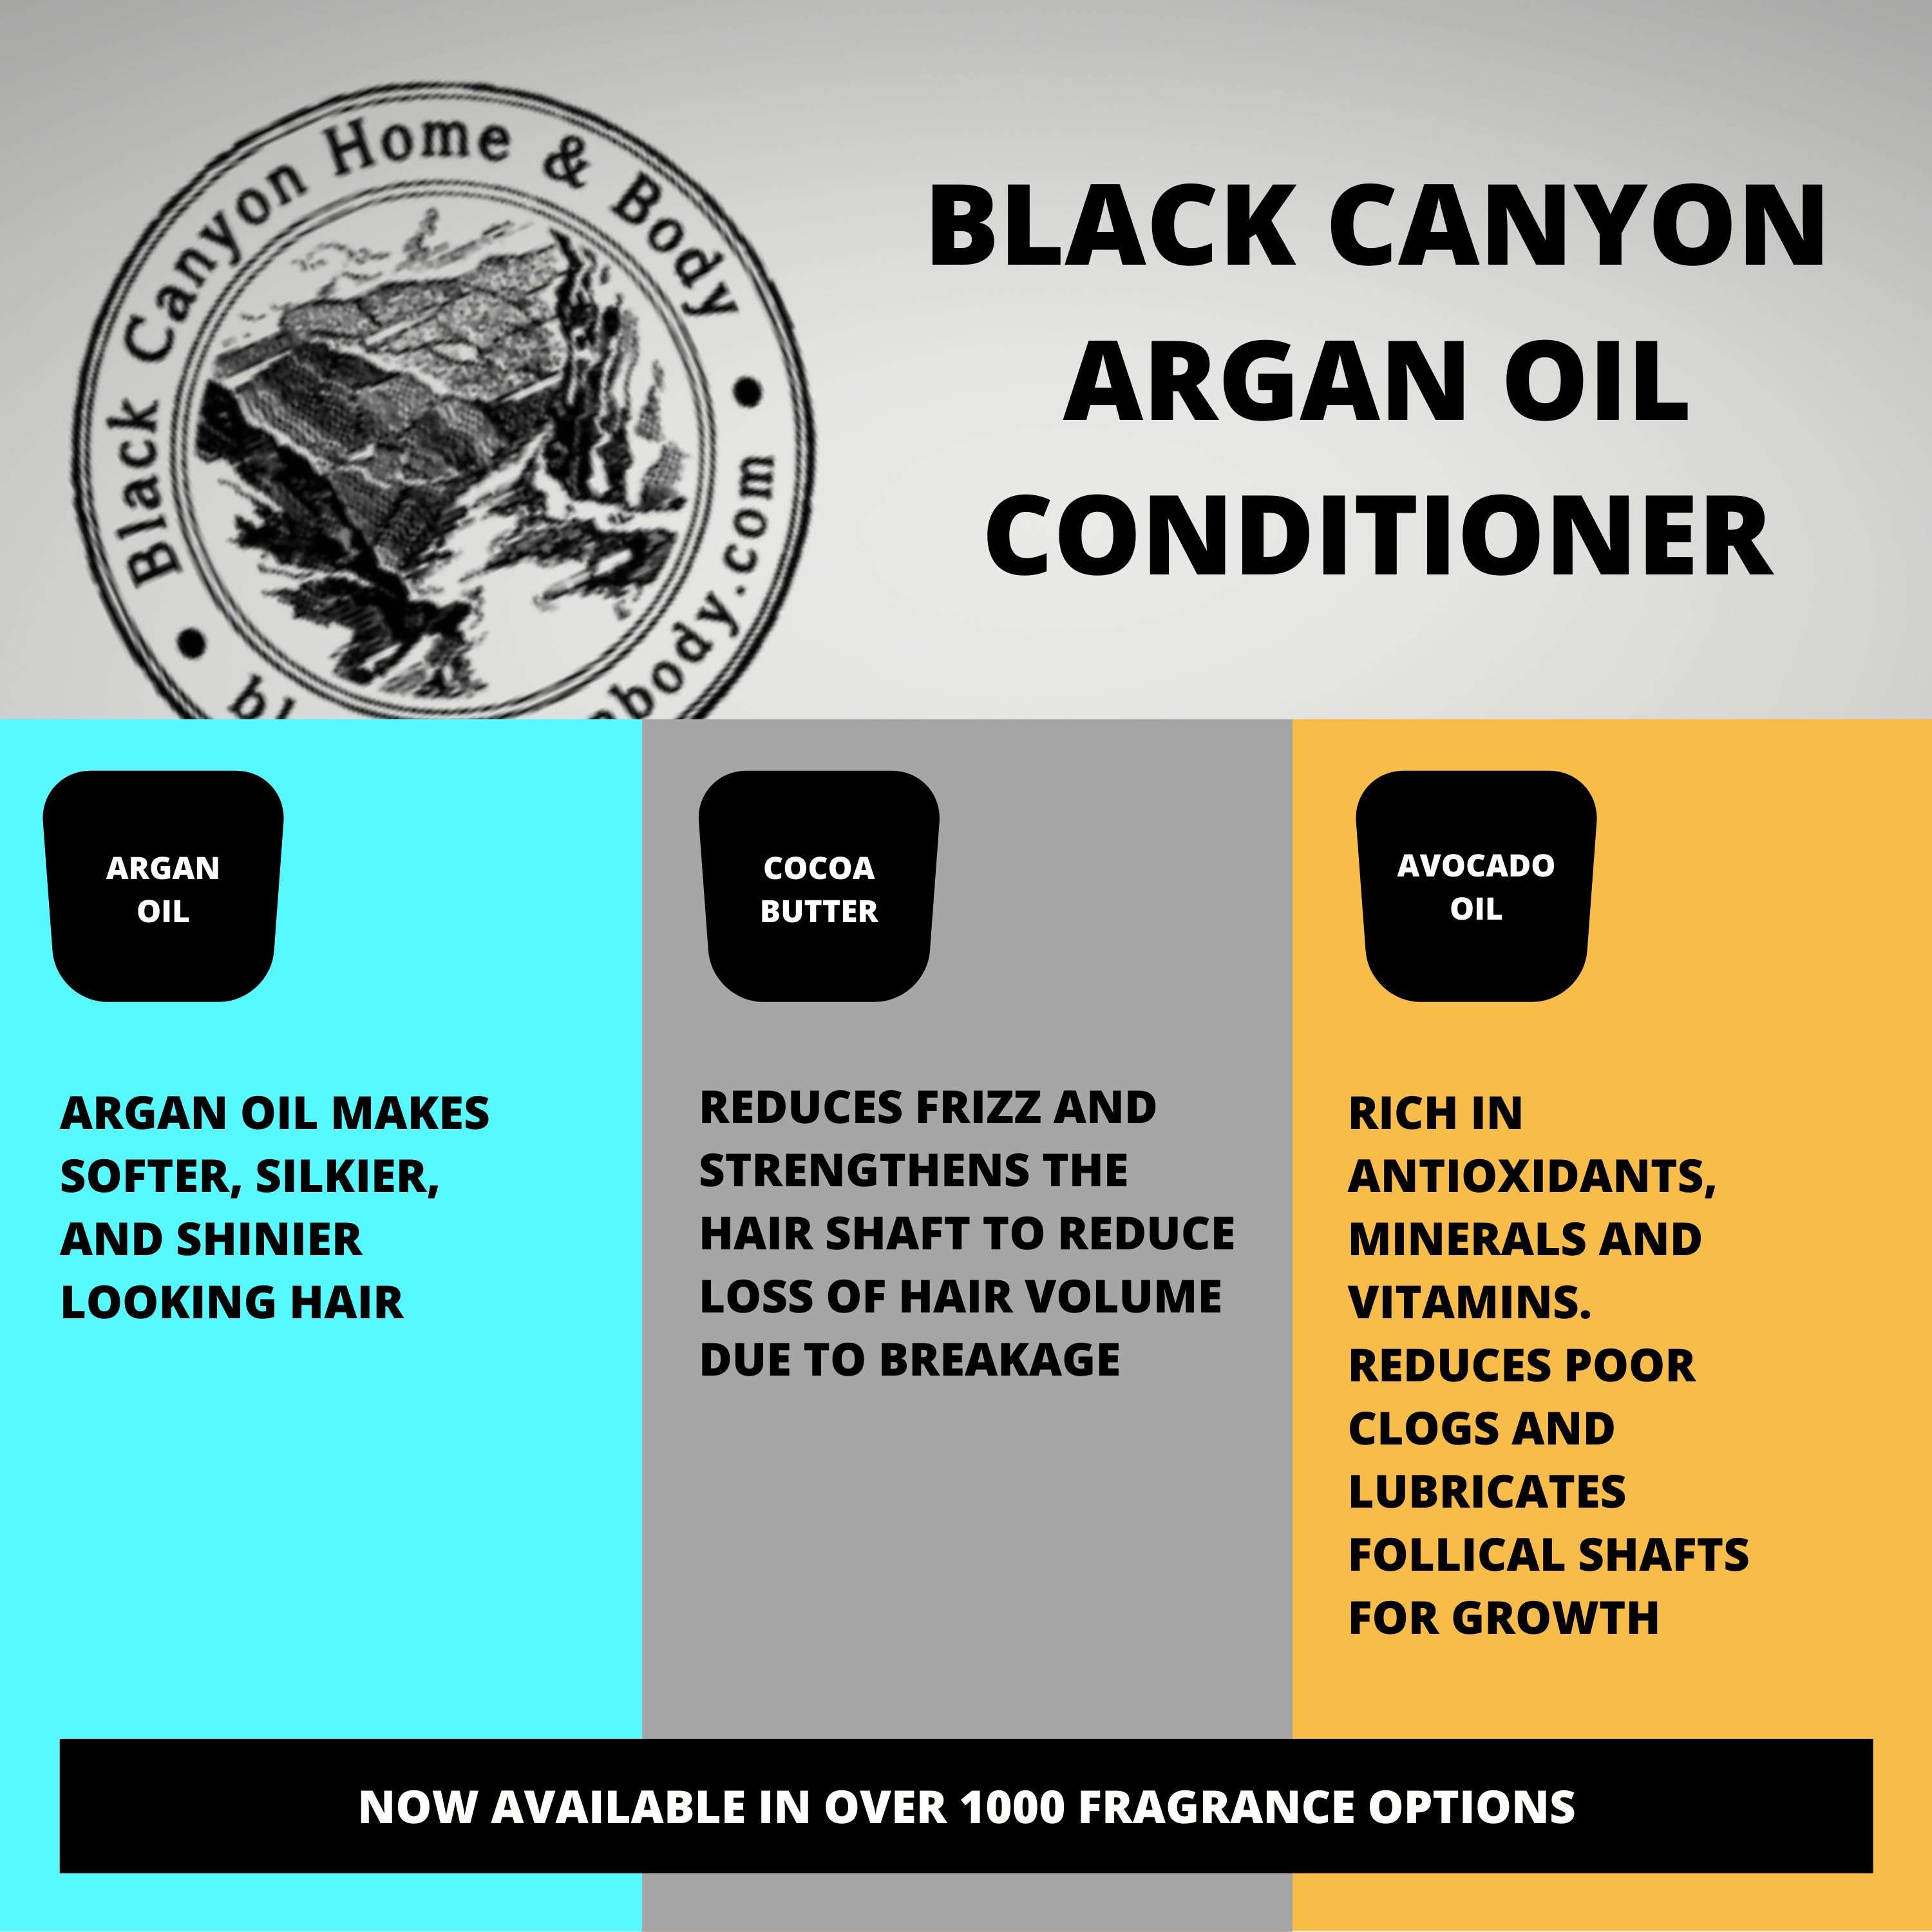 Black Canyon Lemon Tart Scented Conditioner with Argan Oil